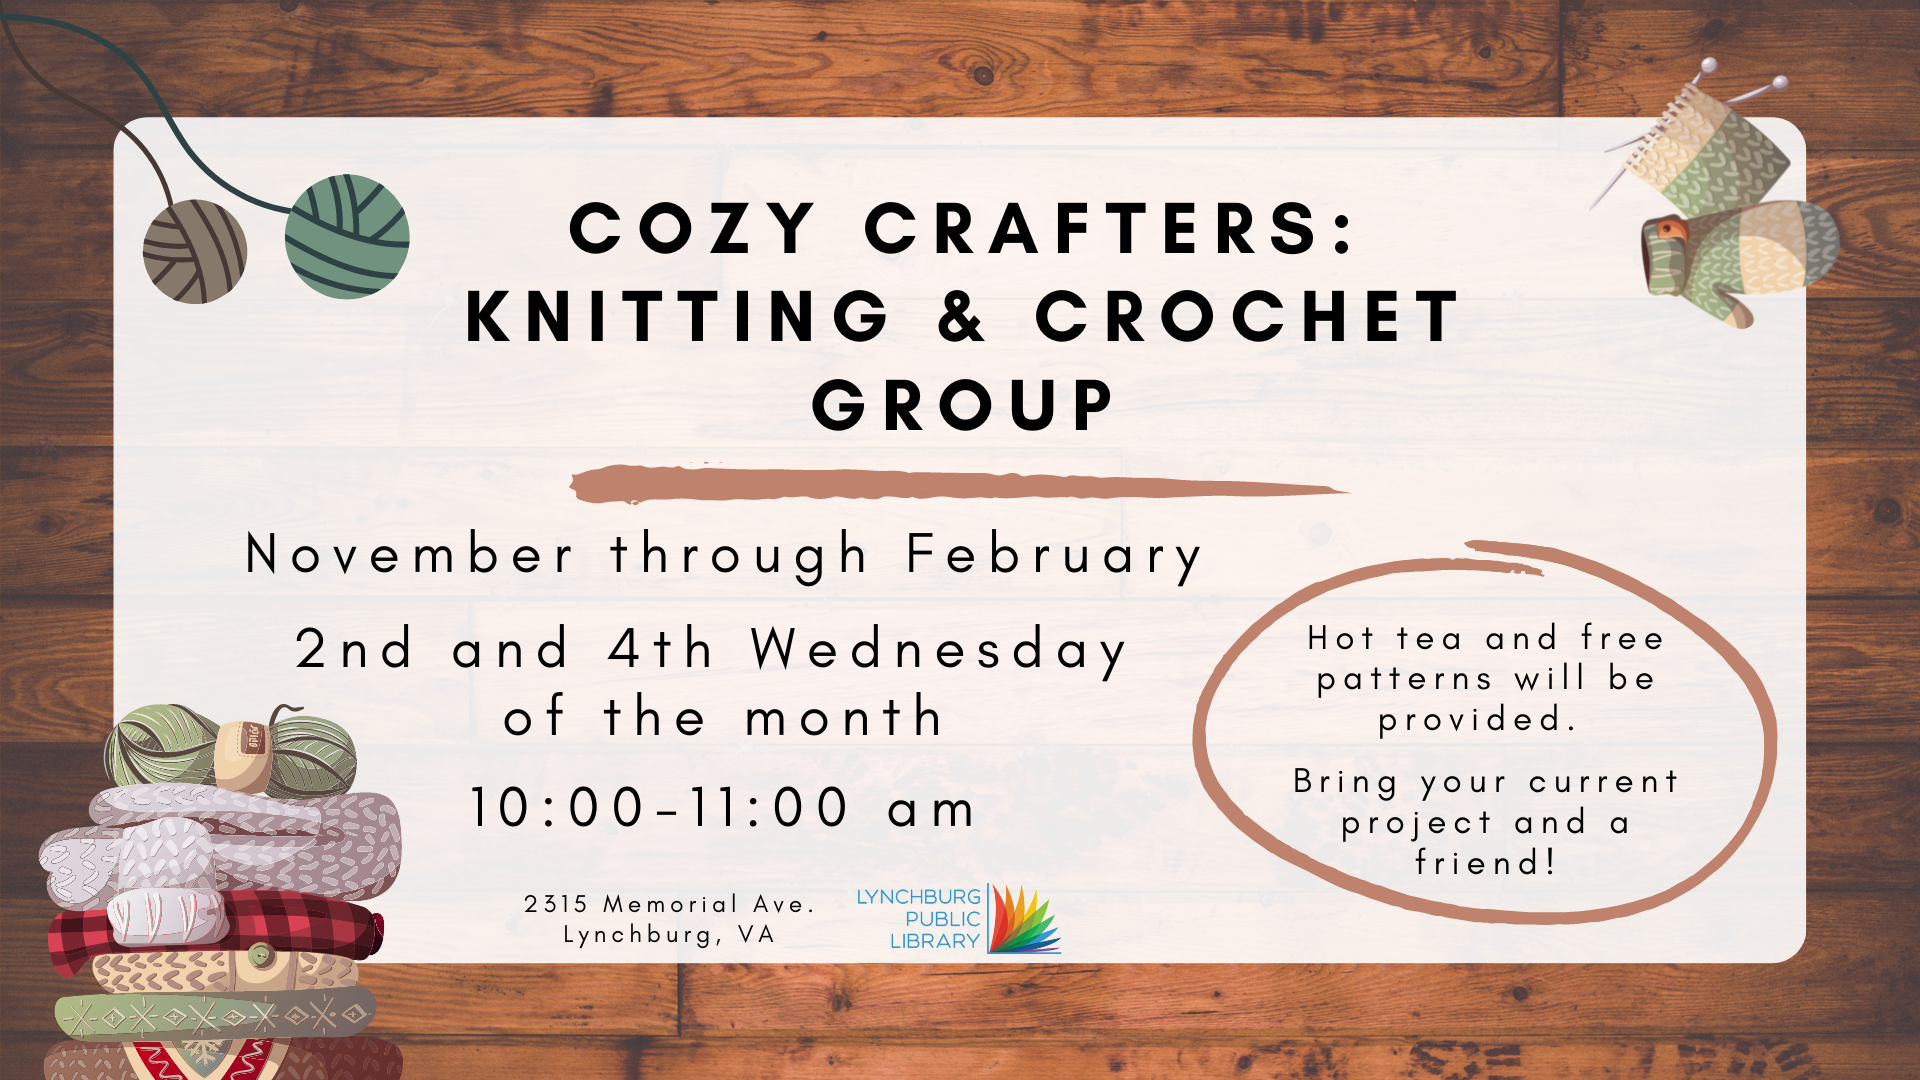 Cozy Crafters Knitting and Crochet Group; November through February, 2nd and 4th Wednesdays of the month, 10-11 am; 2315 Memorial Ave; hot tea and free patterns will be provided; bring your current project and a friend!